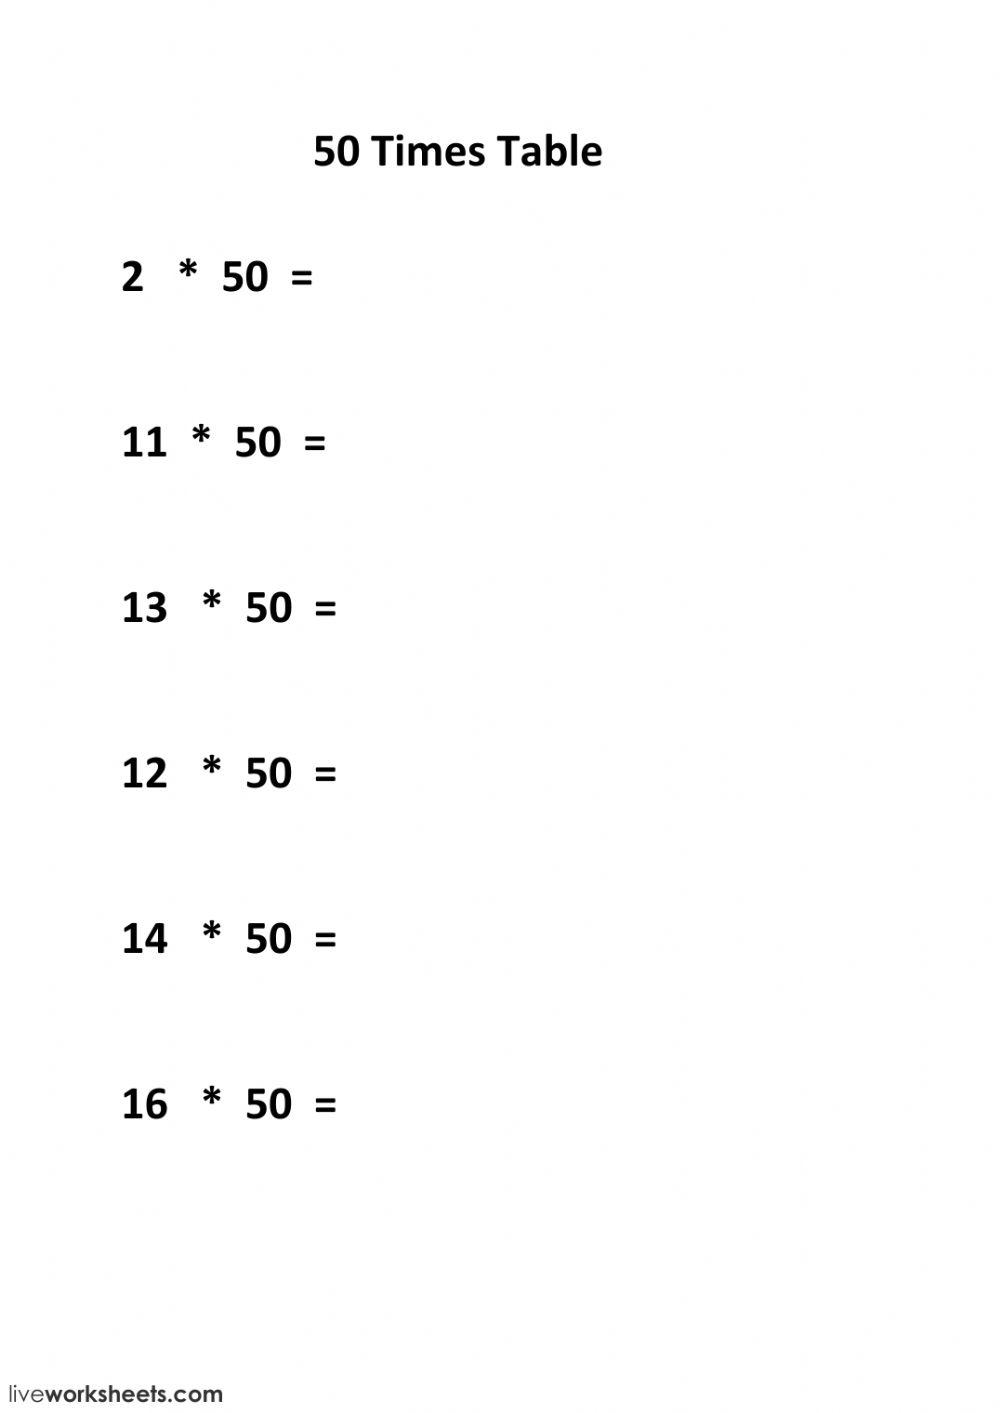 50 Times table